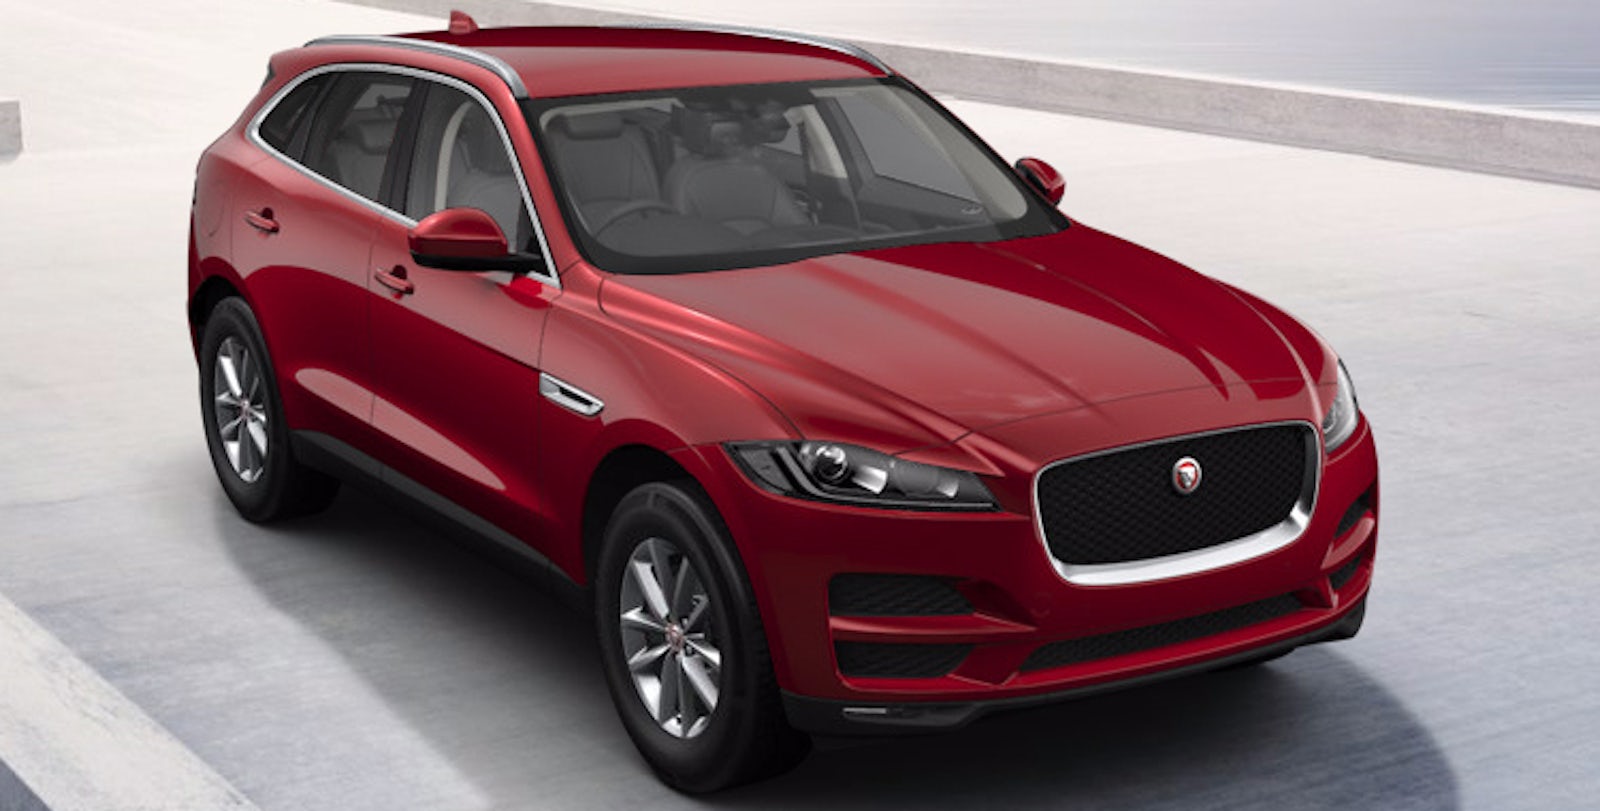 Jaguar F Pace Colours Guide With Prices Carwow